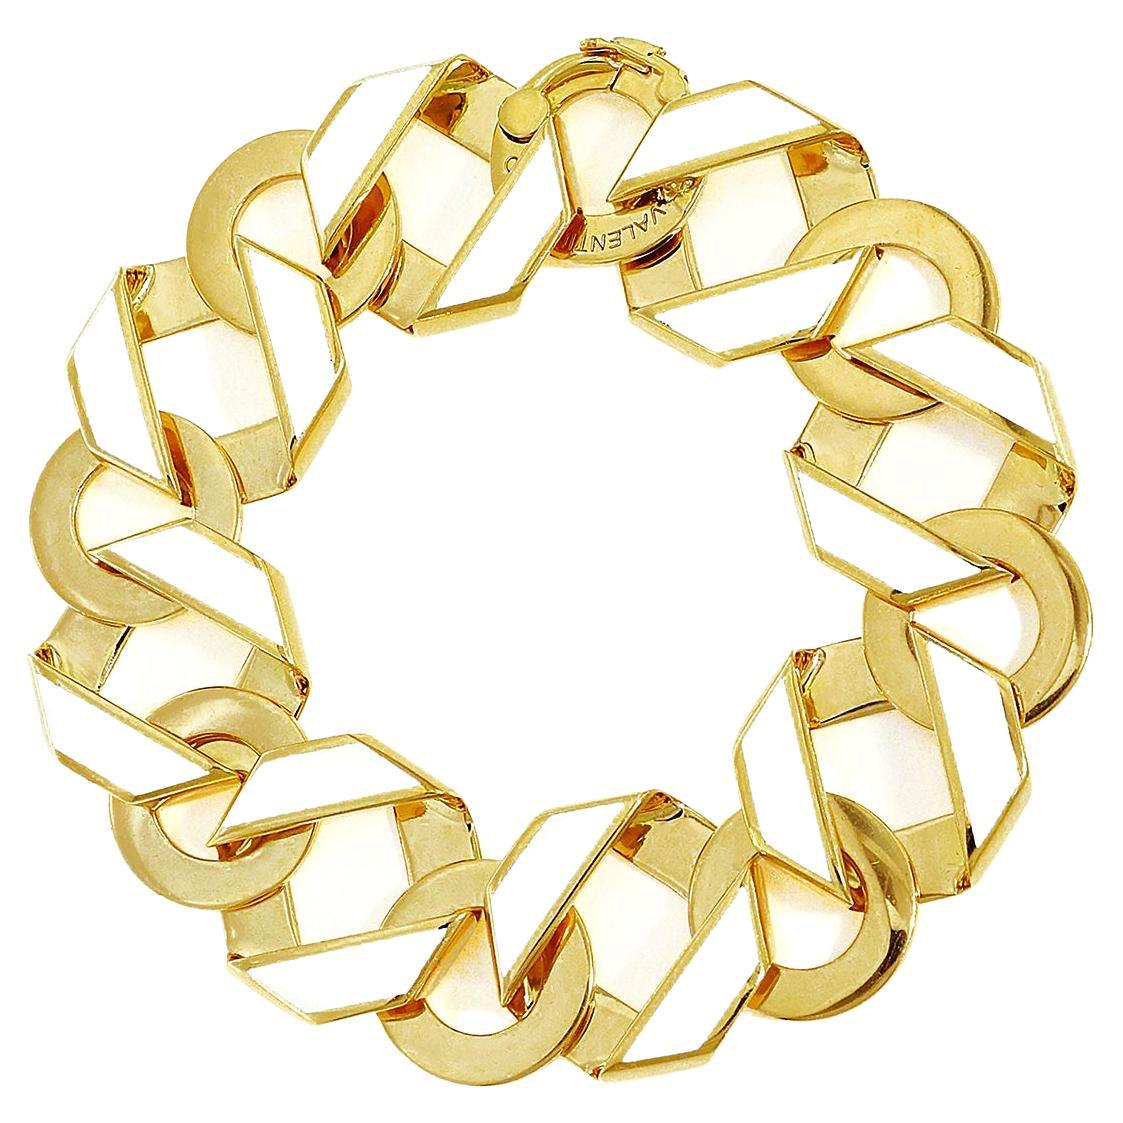 Fold Over White Emaille 18K Gelbgold Kette Gliederarmband